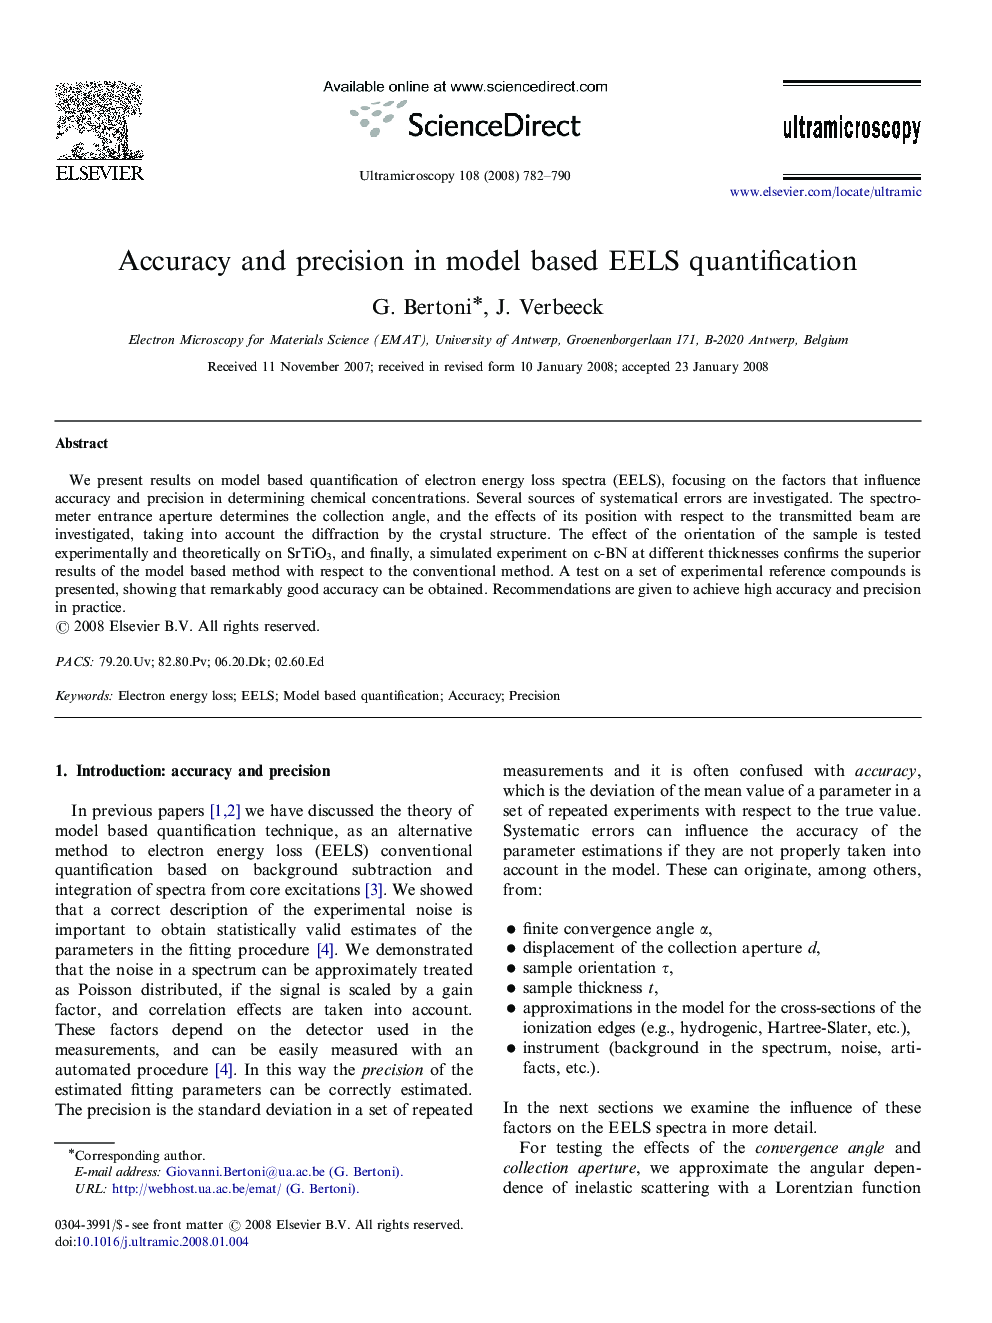 Accuracy and precision in model based EELS quantification